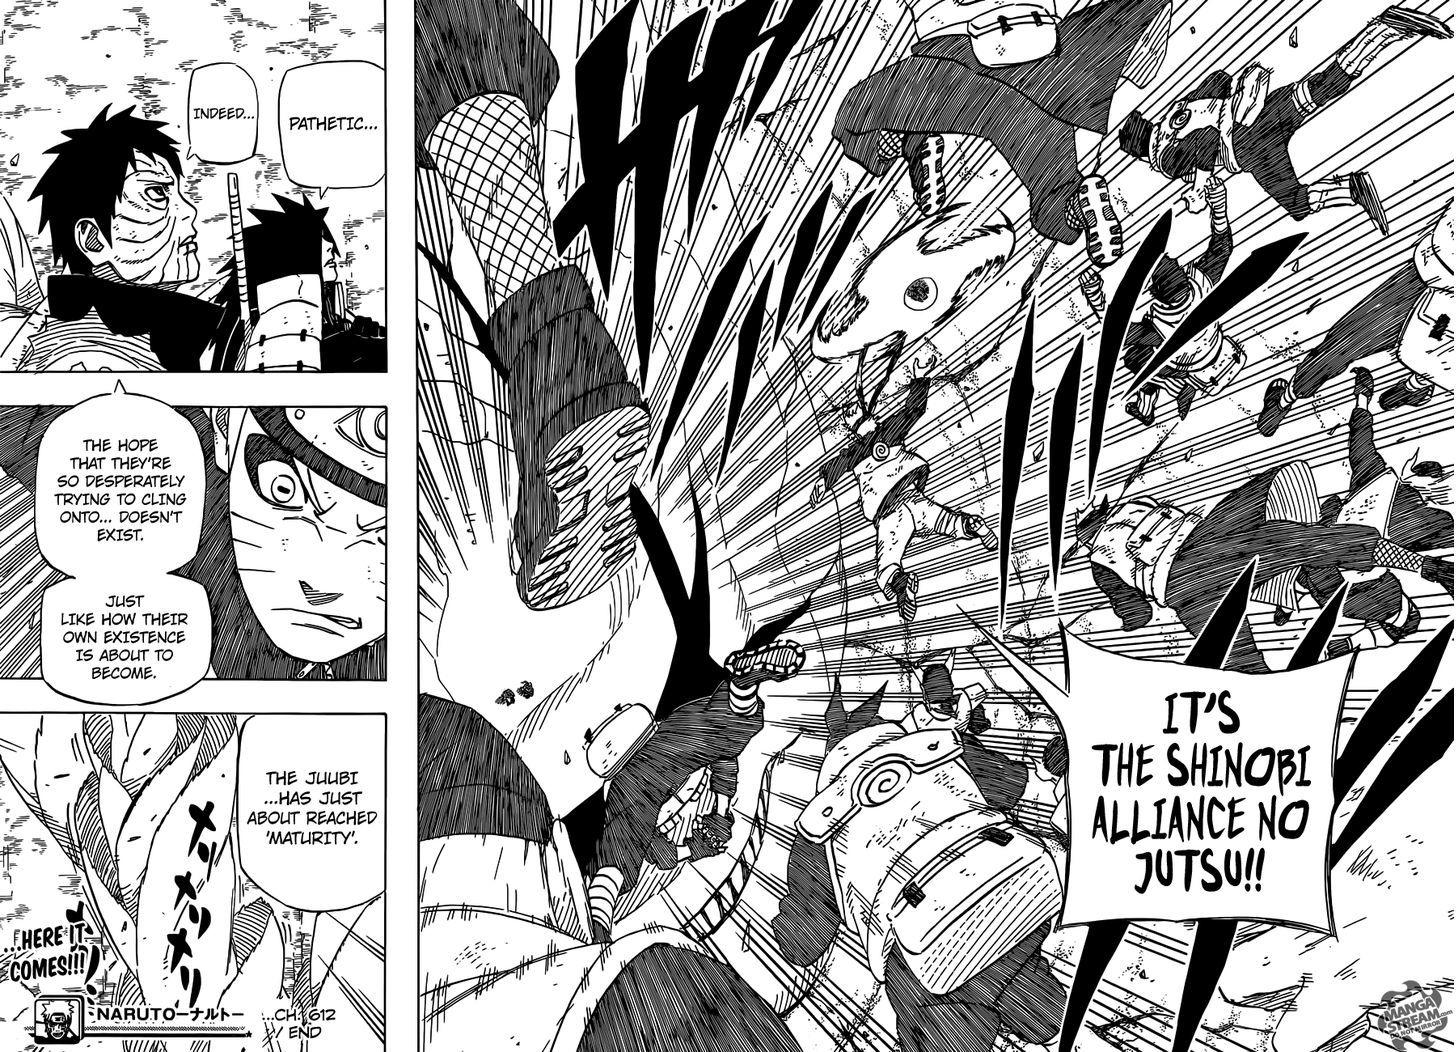 Vol.64 Chapter 612 – Allied Shinobi Forces Technique!! | 16 page